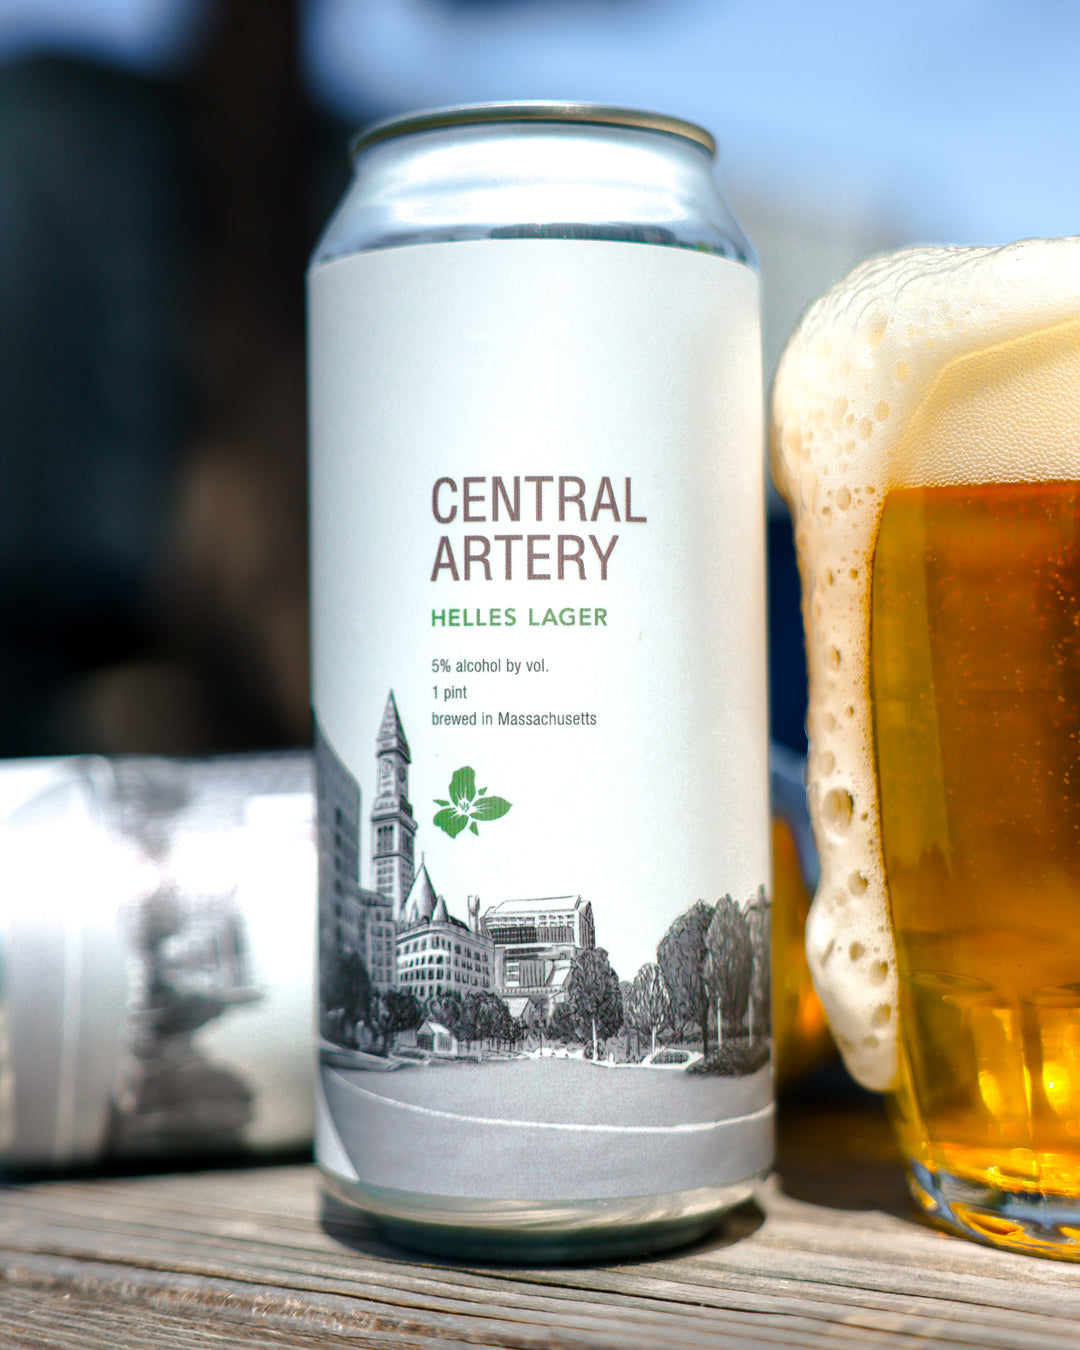 Central Artery Helles Lager